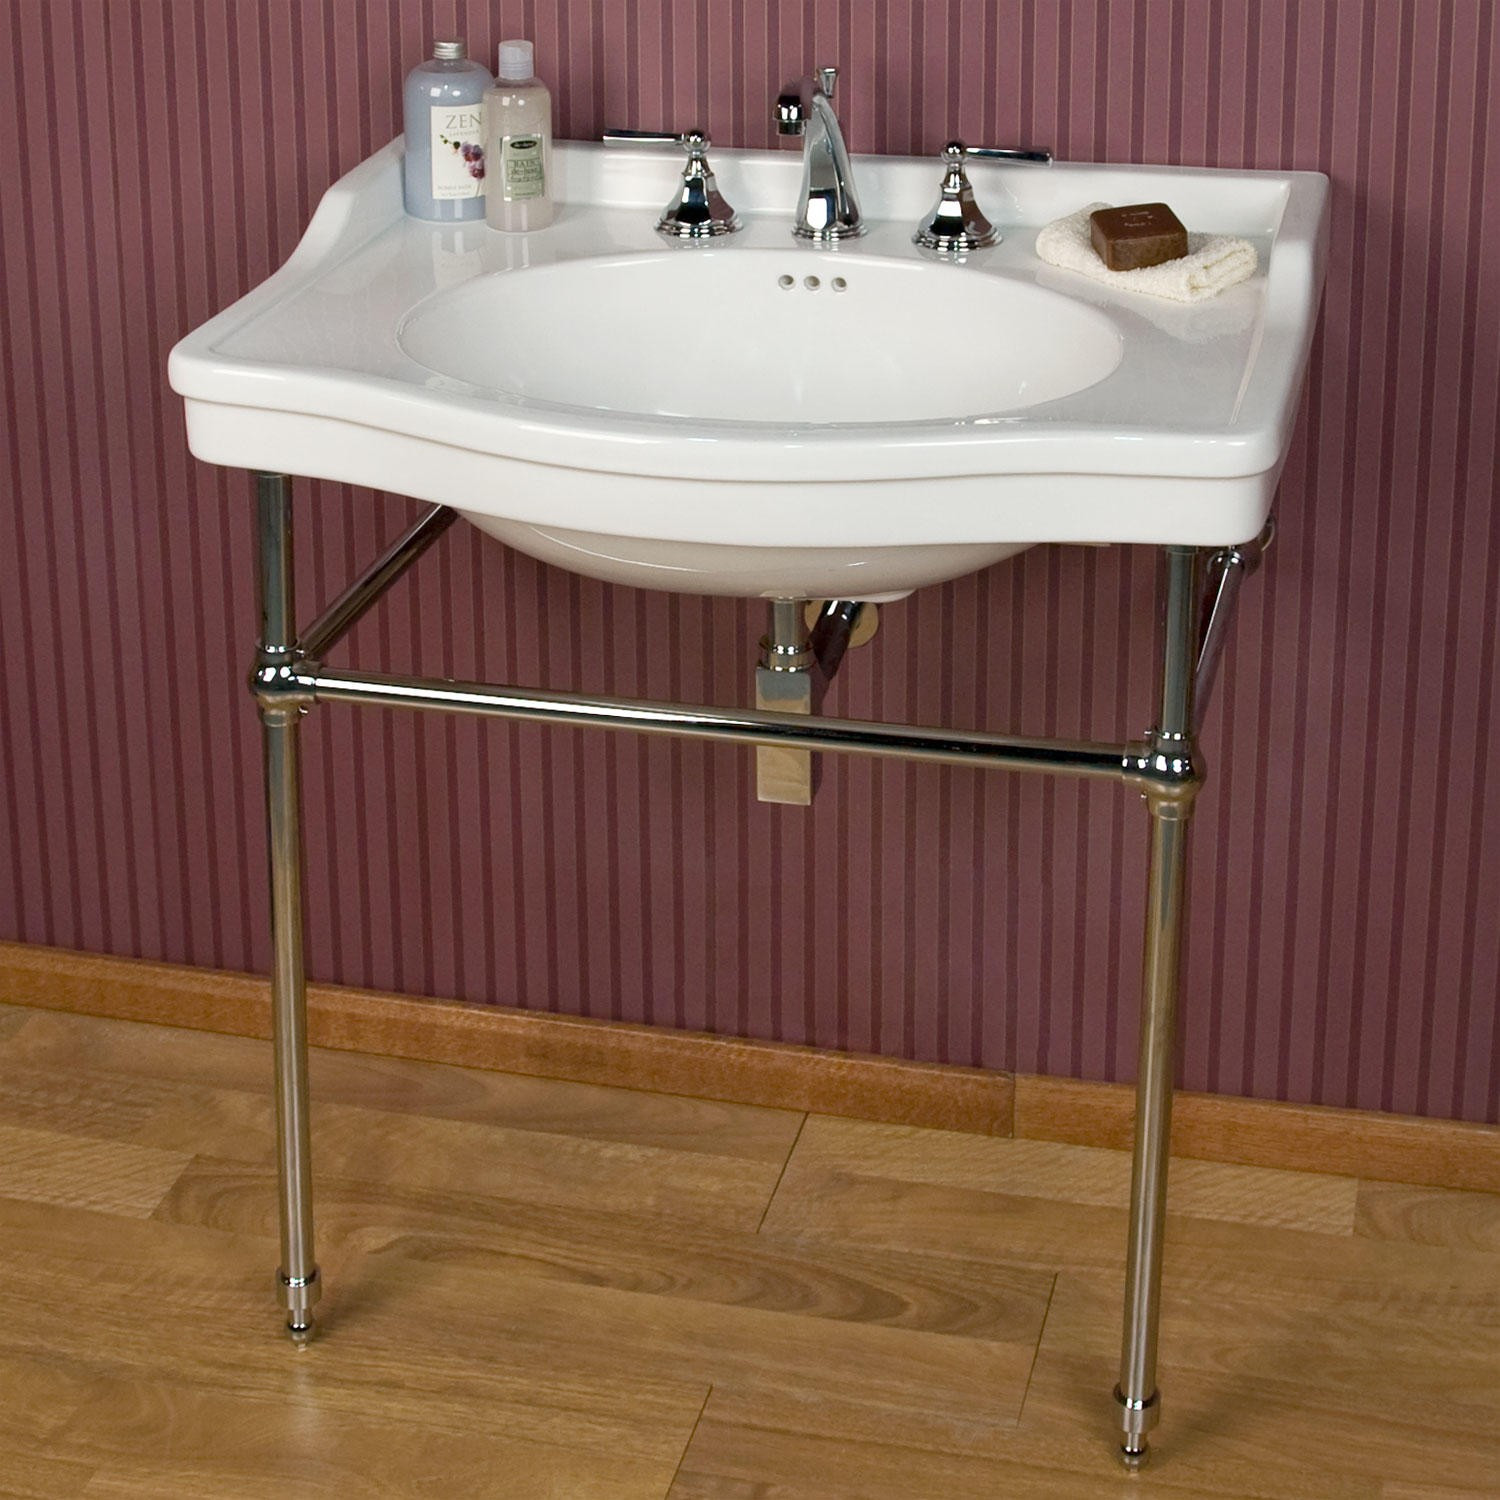 Console Sink Bathroom
 Bathroom Console Sink For Unique Free Standing Sink